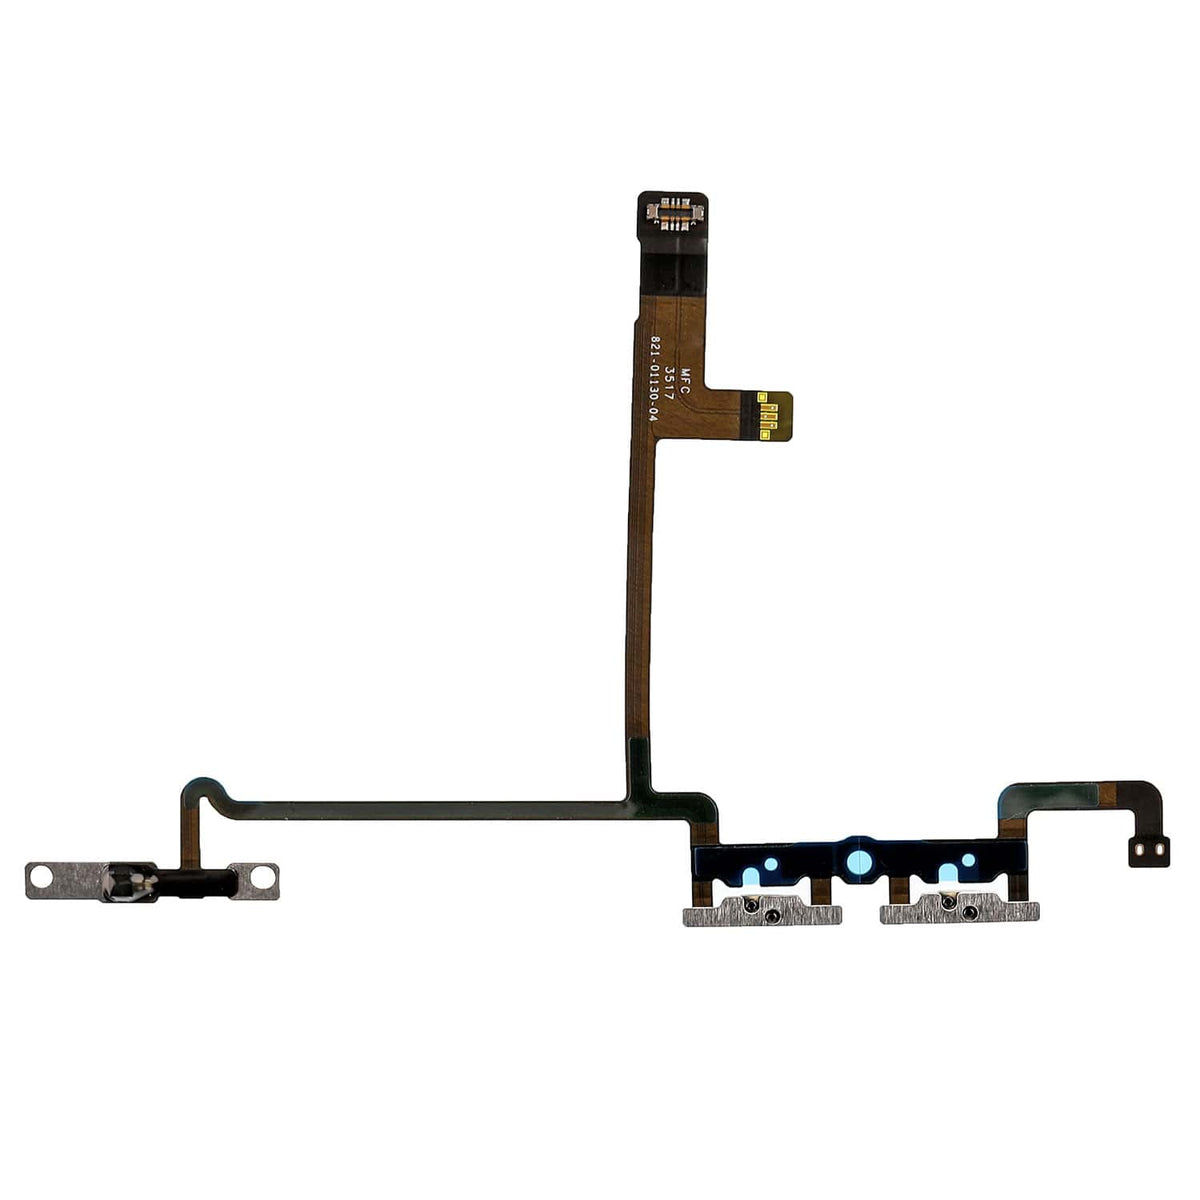 VOLUME BUTTON FLEX CABLE FOR IPHONE X